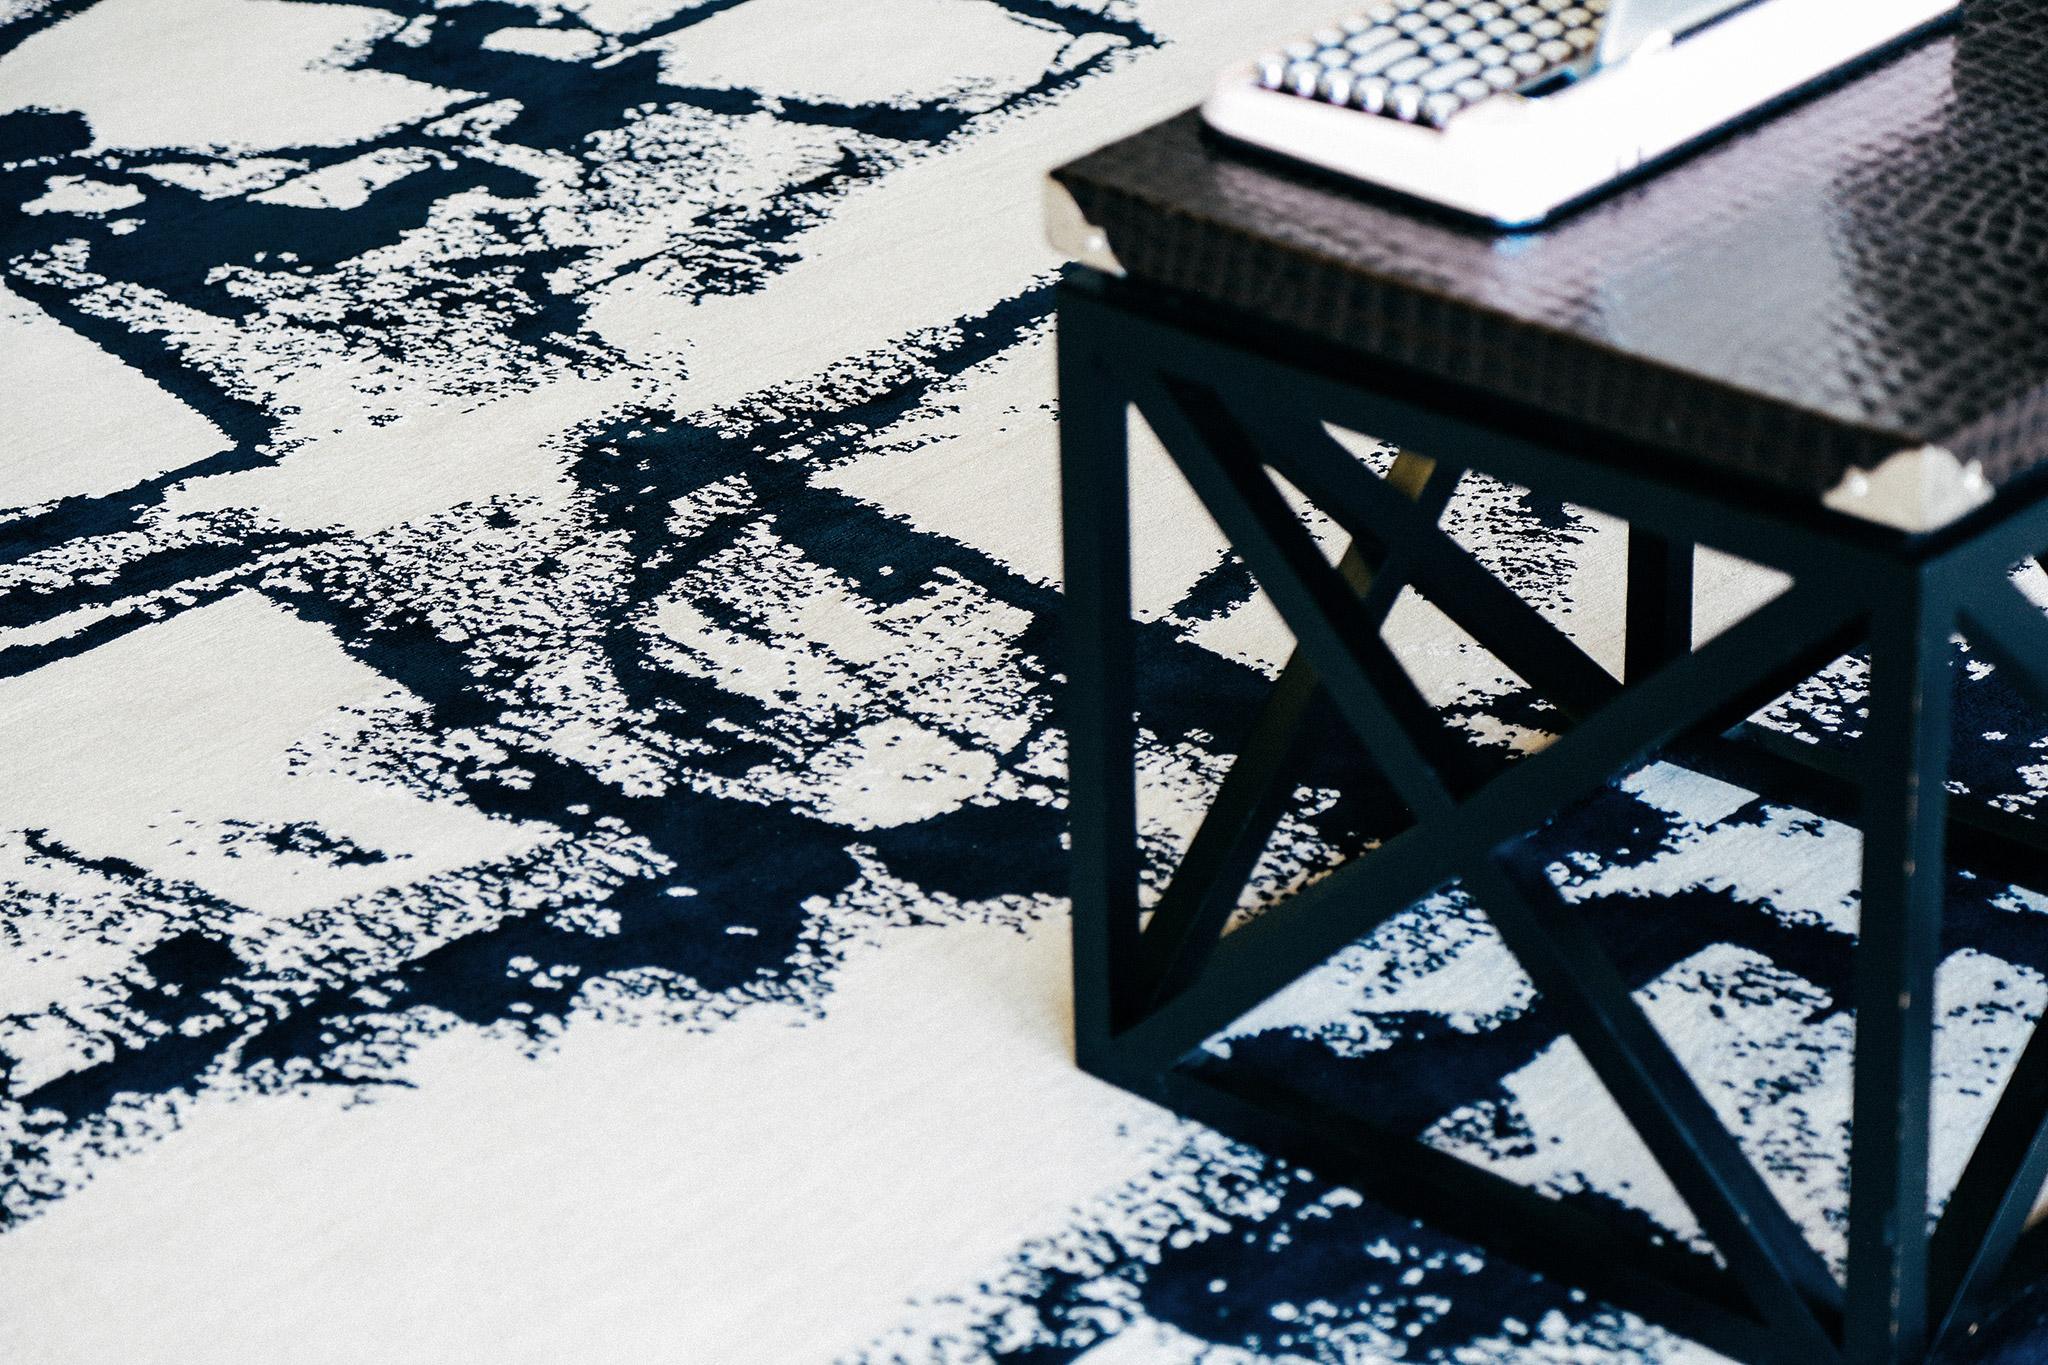 The eight carpets in the collection are inspired by the ways in which human beings express themselves: language, poetry, art, and architecture. Bisous is intended as a celebration--an exultation--shared through original artwork, expertly translated